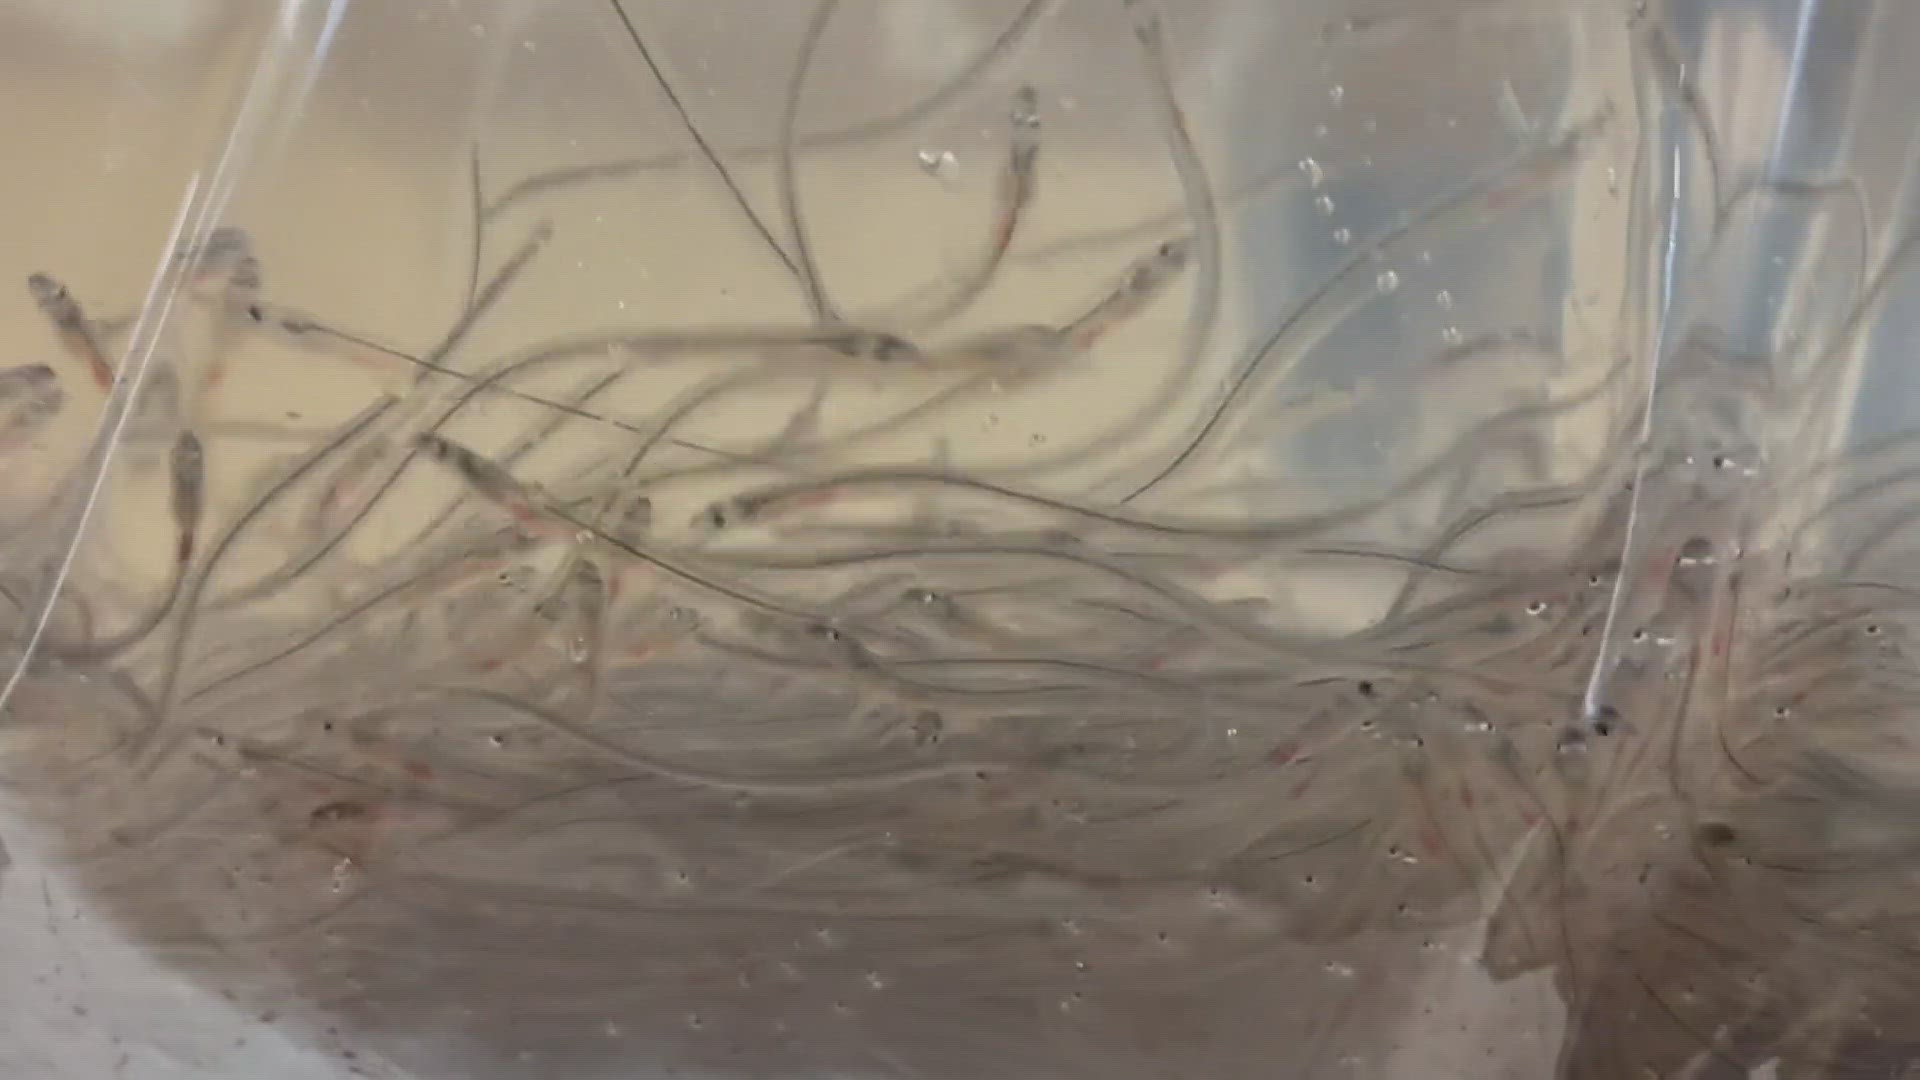 Regulators say they are keeping tight restrictions on lucrative elver fishing.